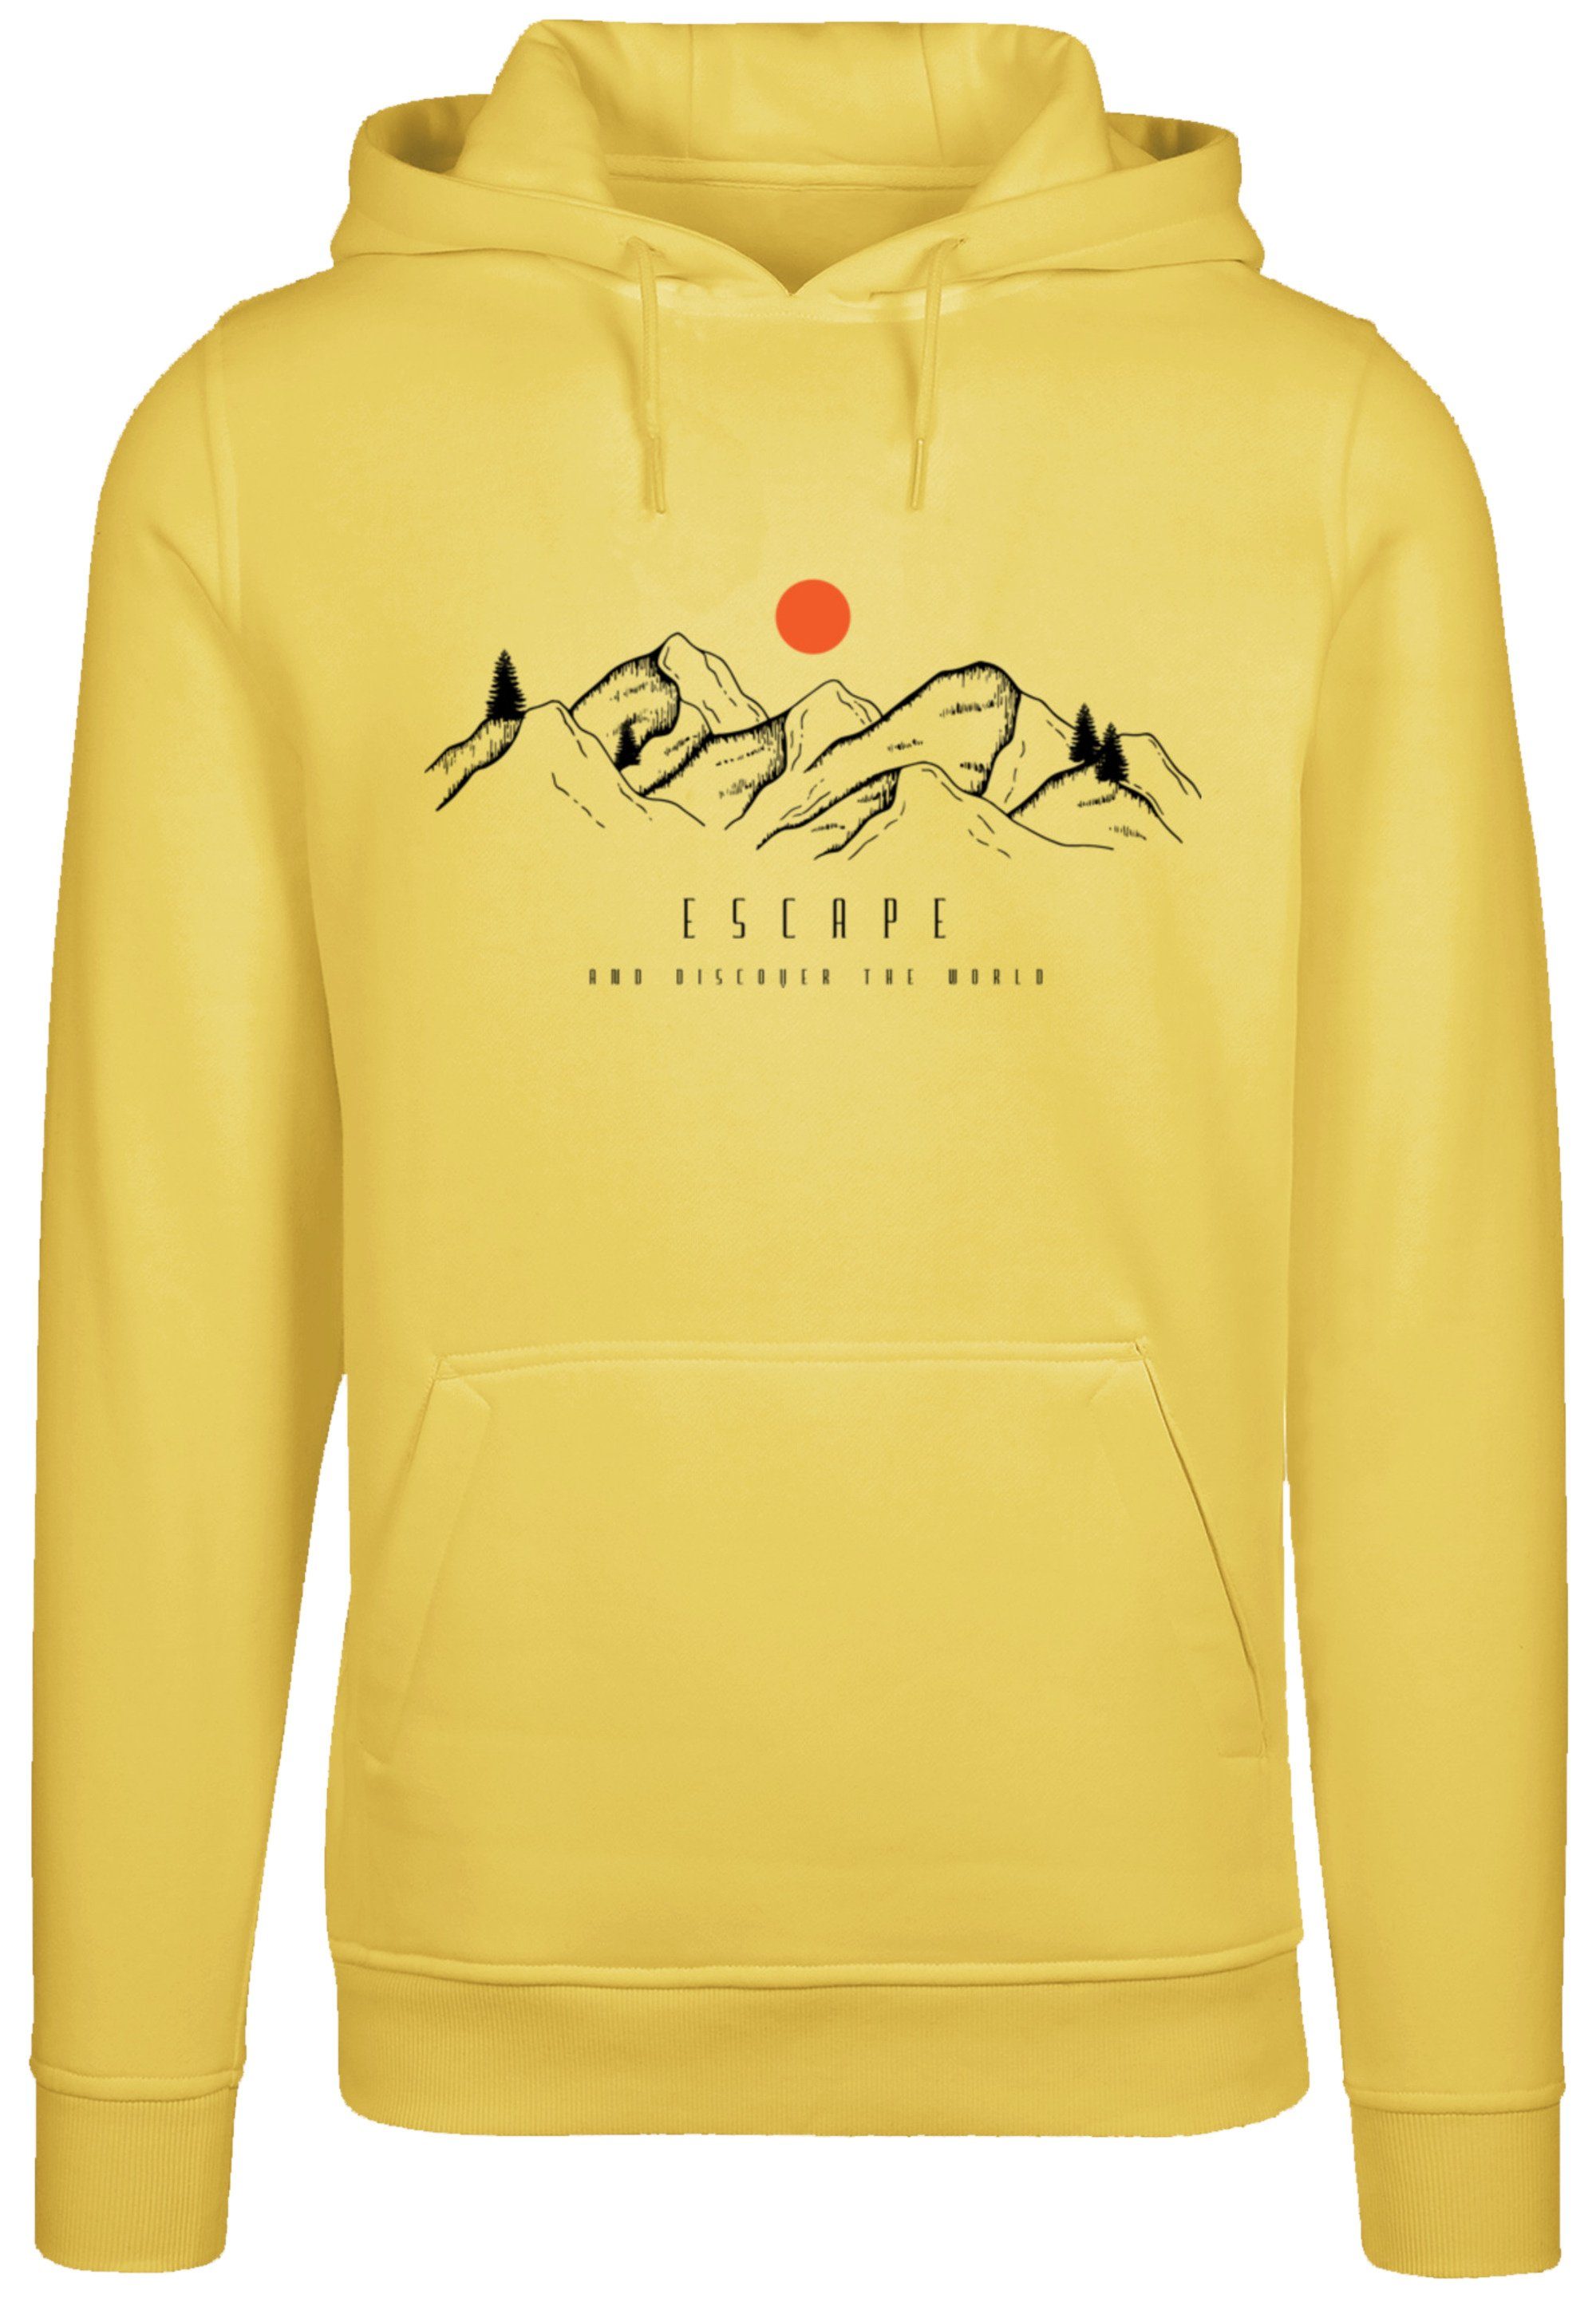 the Bequem F4NT4STIC Warm, yellow Kapuzenpullover taxi Hoodie, Discover world